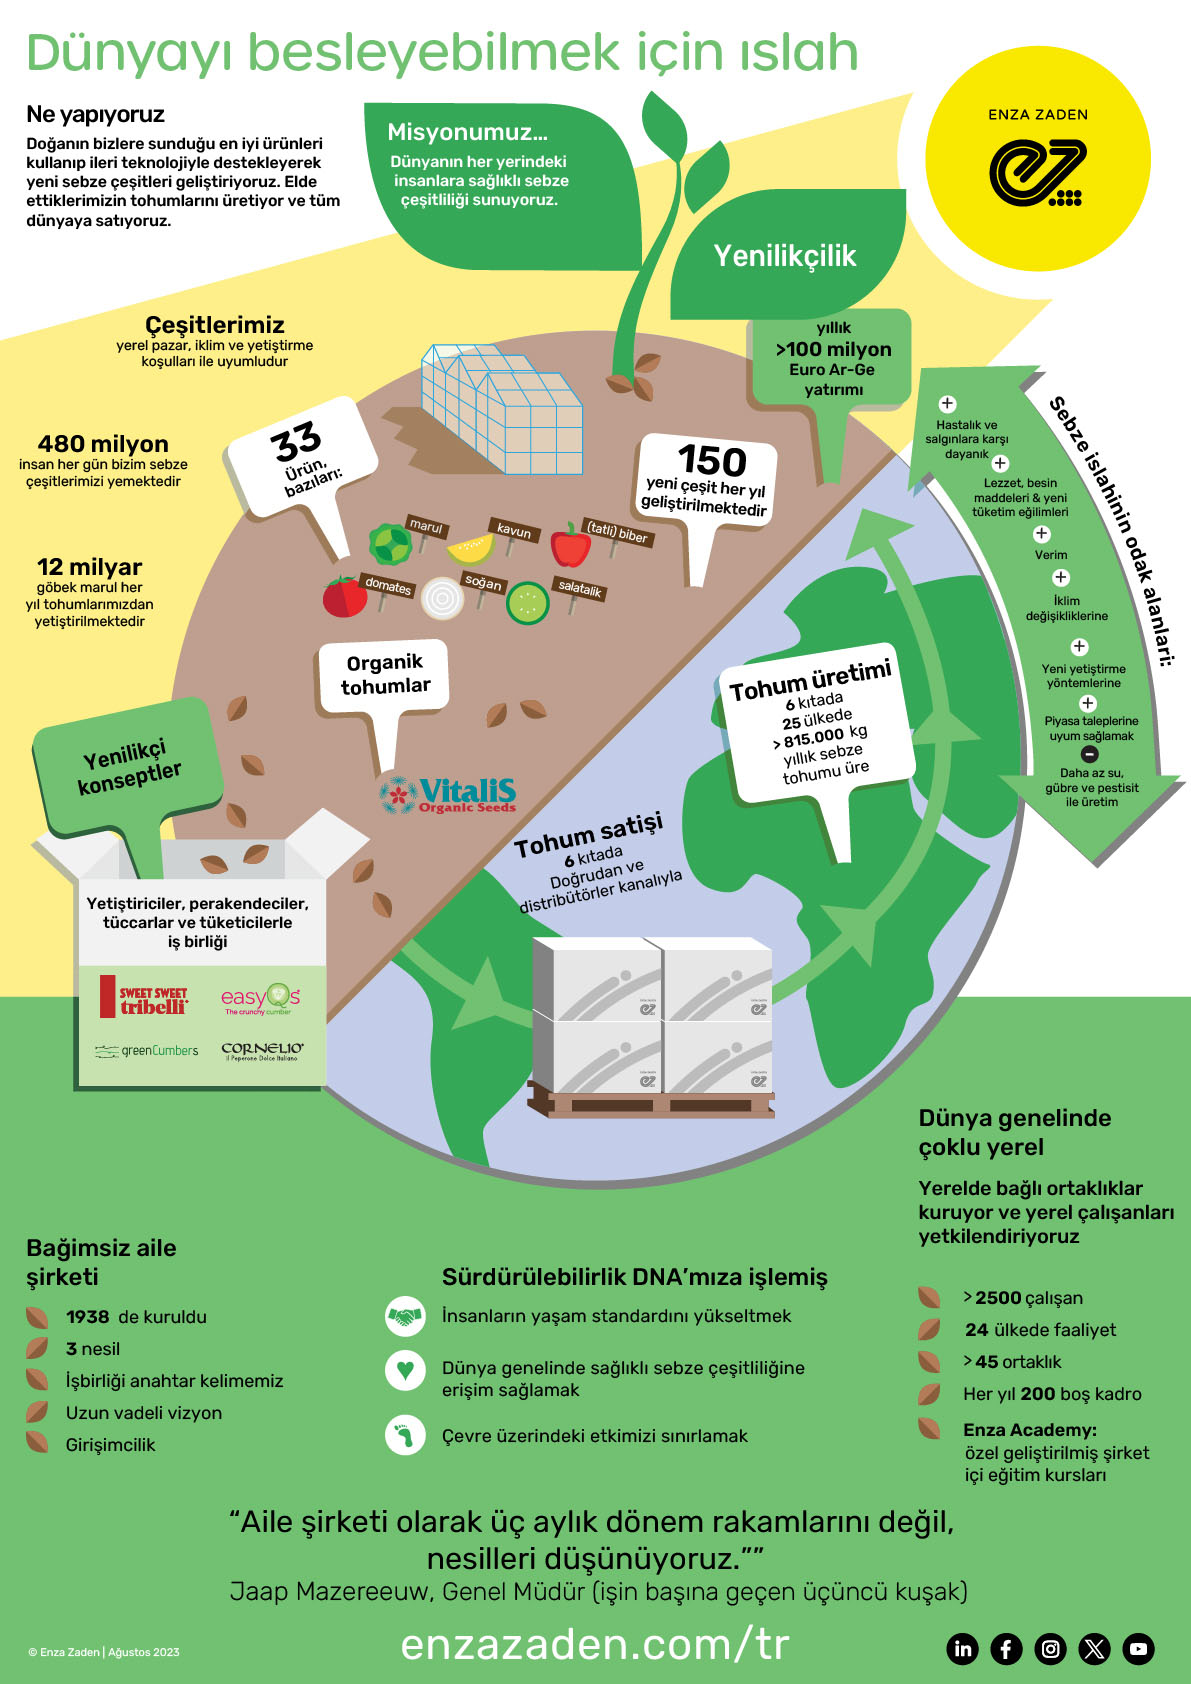 Infographic Enza Zaden - What we do - Breeding To Feed the World